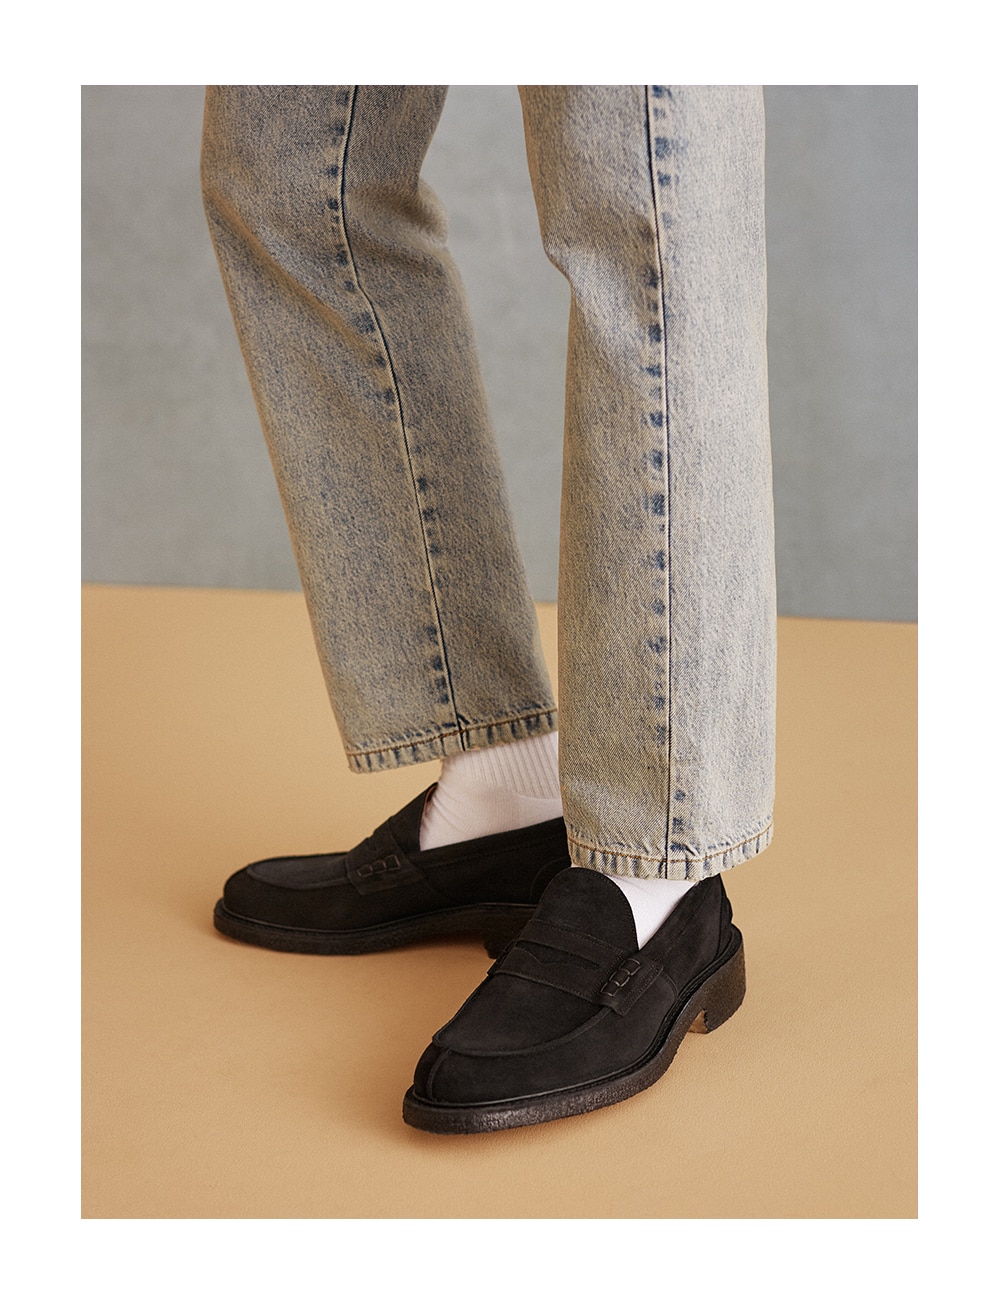 gallon endnu engang Kronisk Dress Code: The Men's Guide To Wearing Loafers | The Journal | MR PORTER